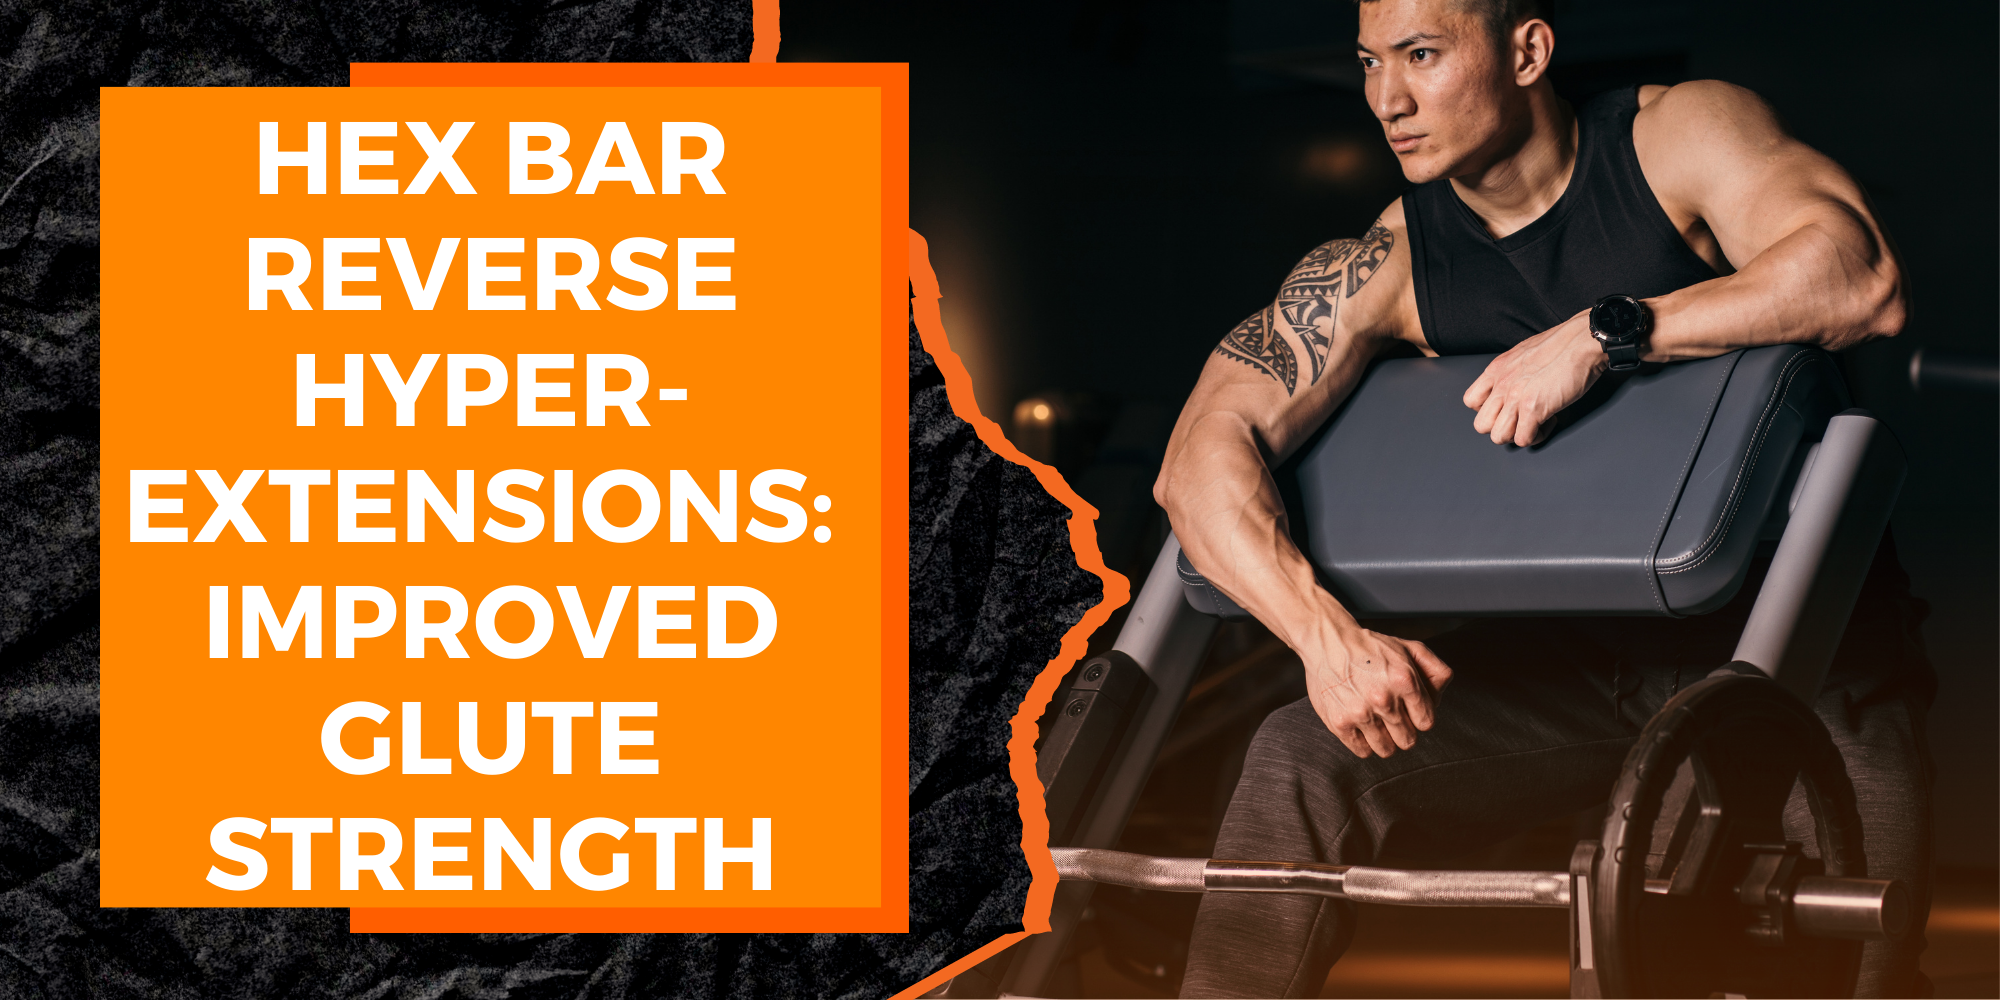 Hex Bar Reverse Hyperextensions: An Exercise for Improved Glute Strength